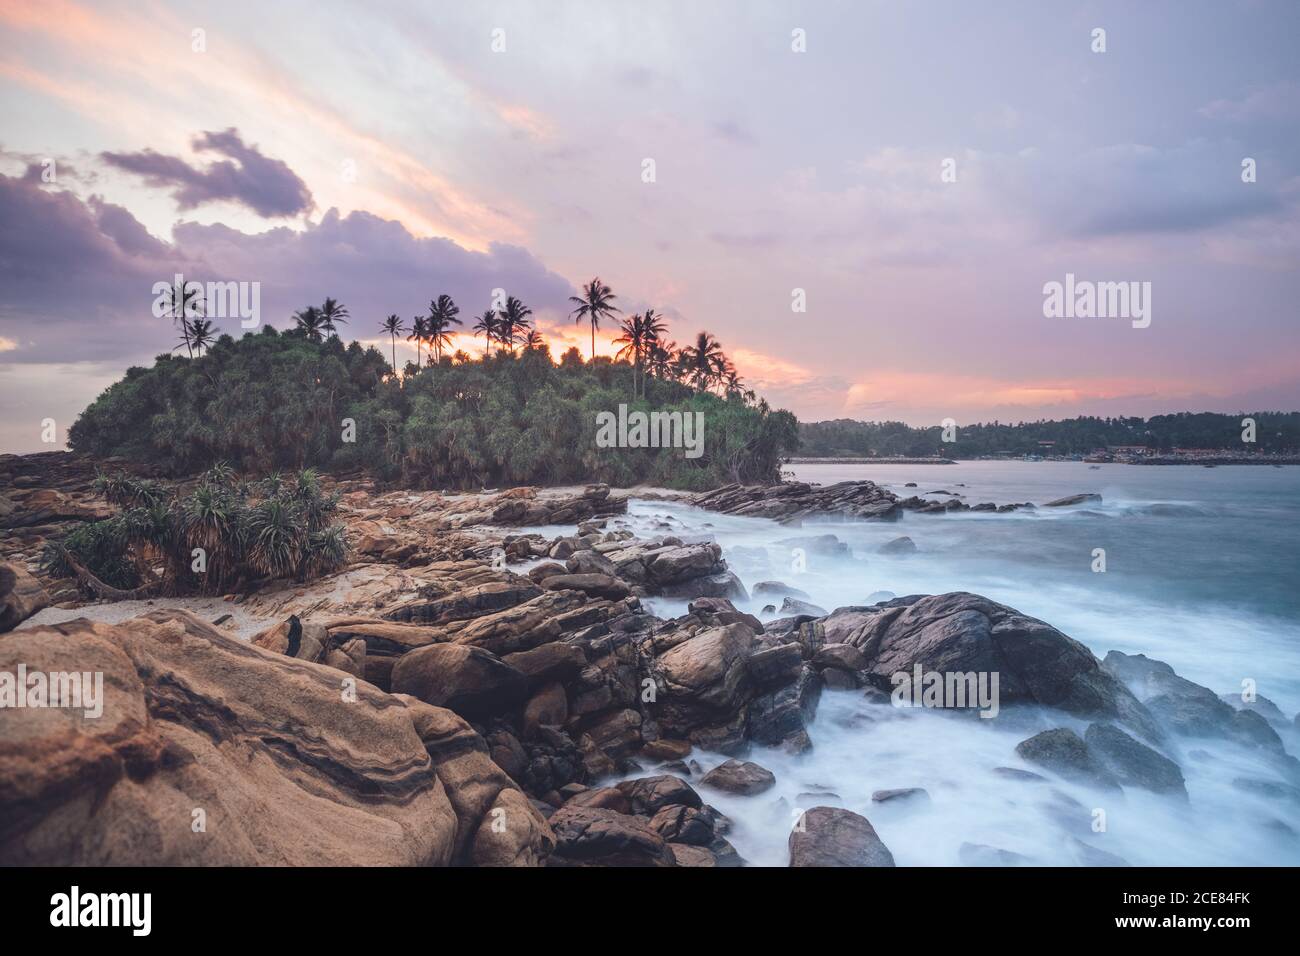 Amazing scenery of rocky coast and green palm trees near sea under picturesque sunset sky Stock Photo